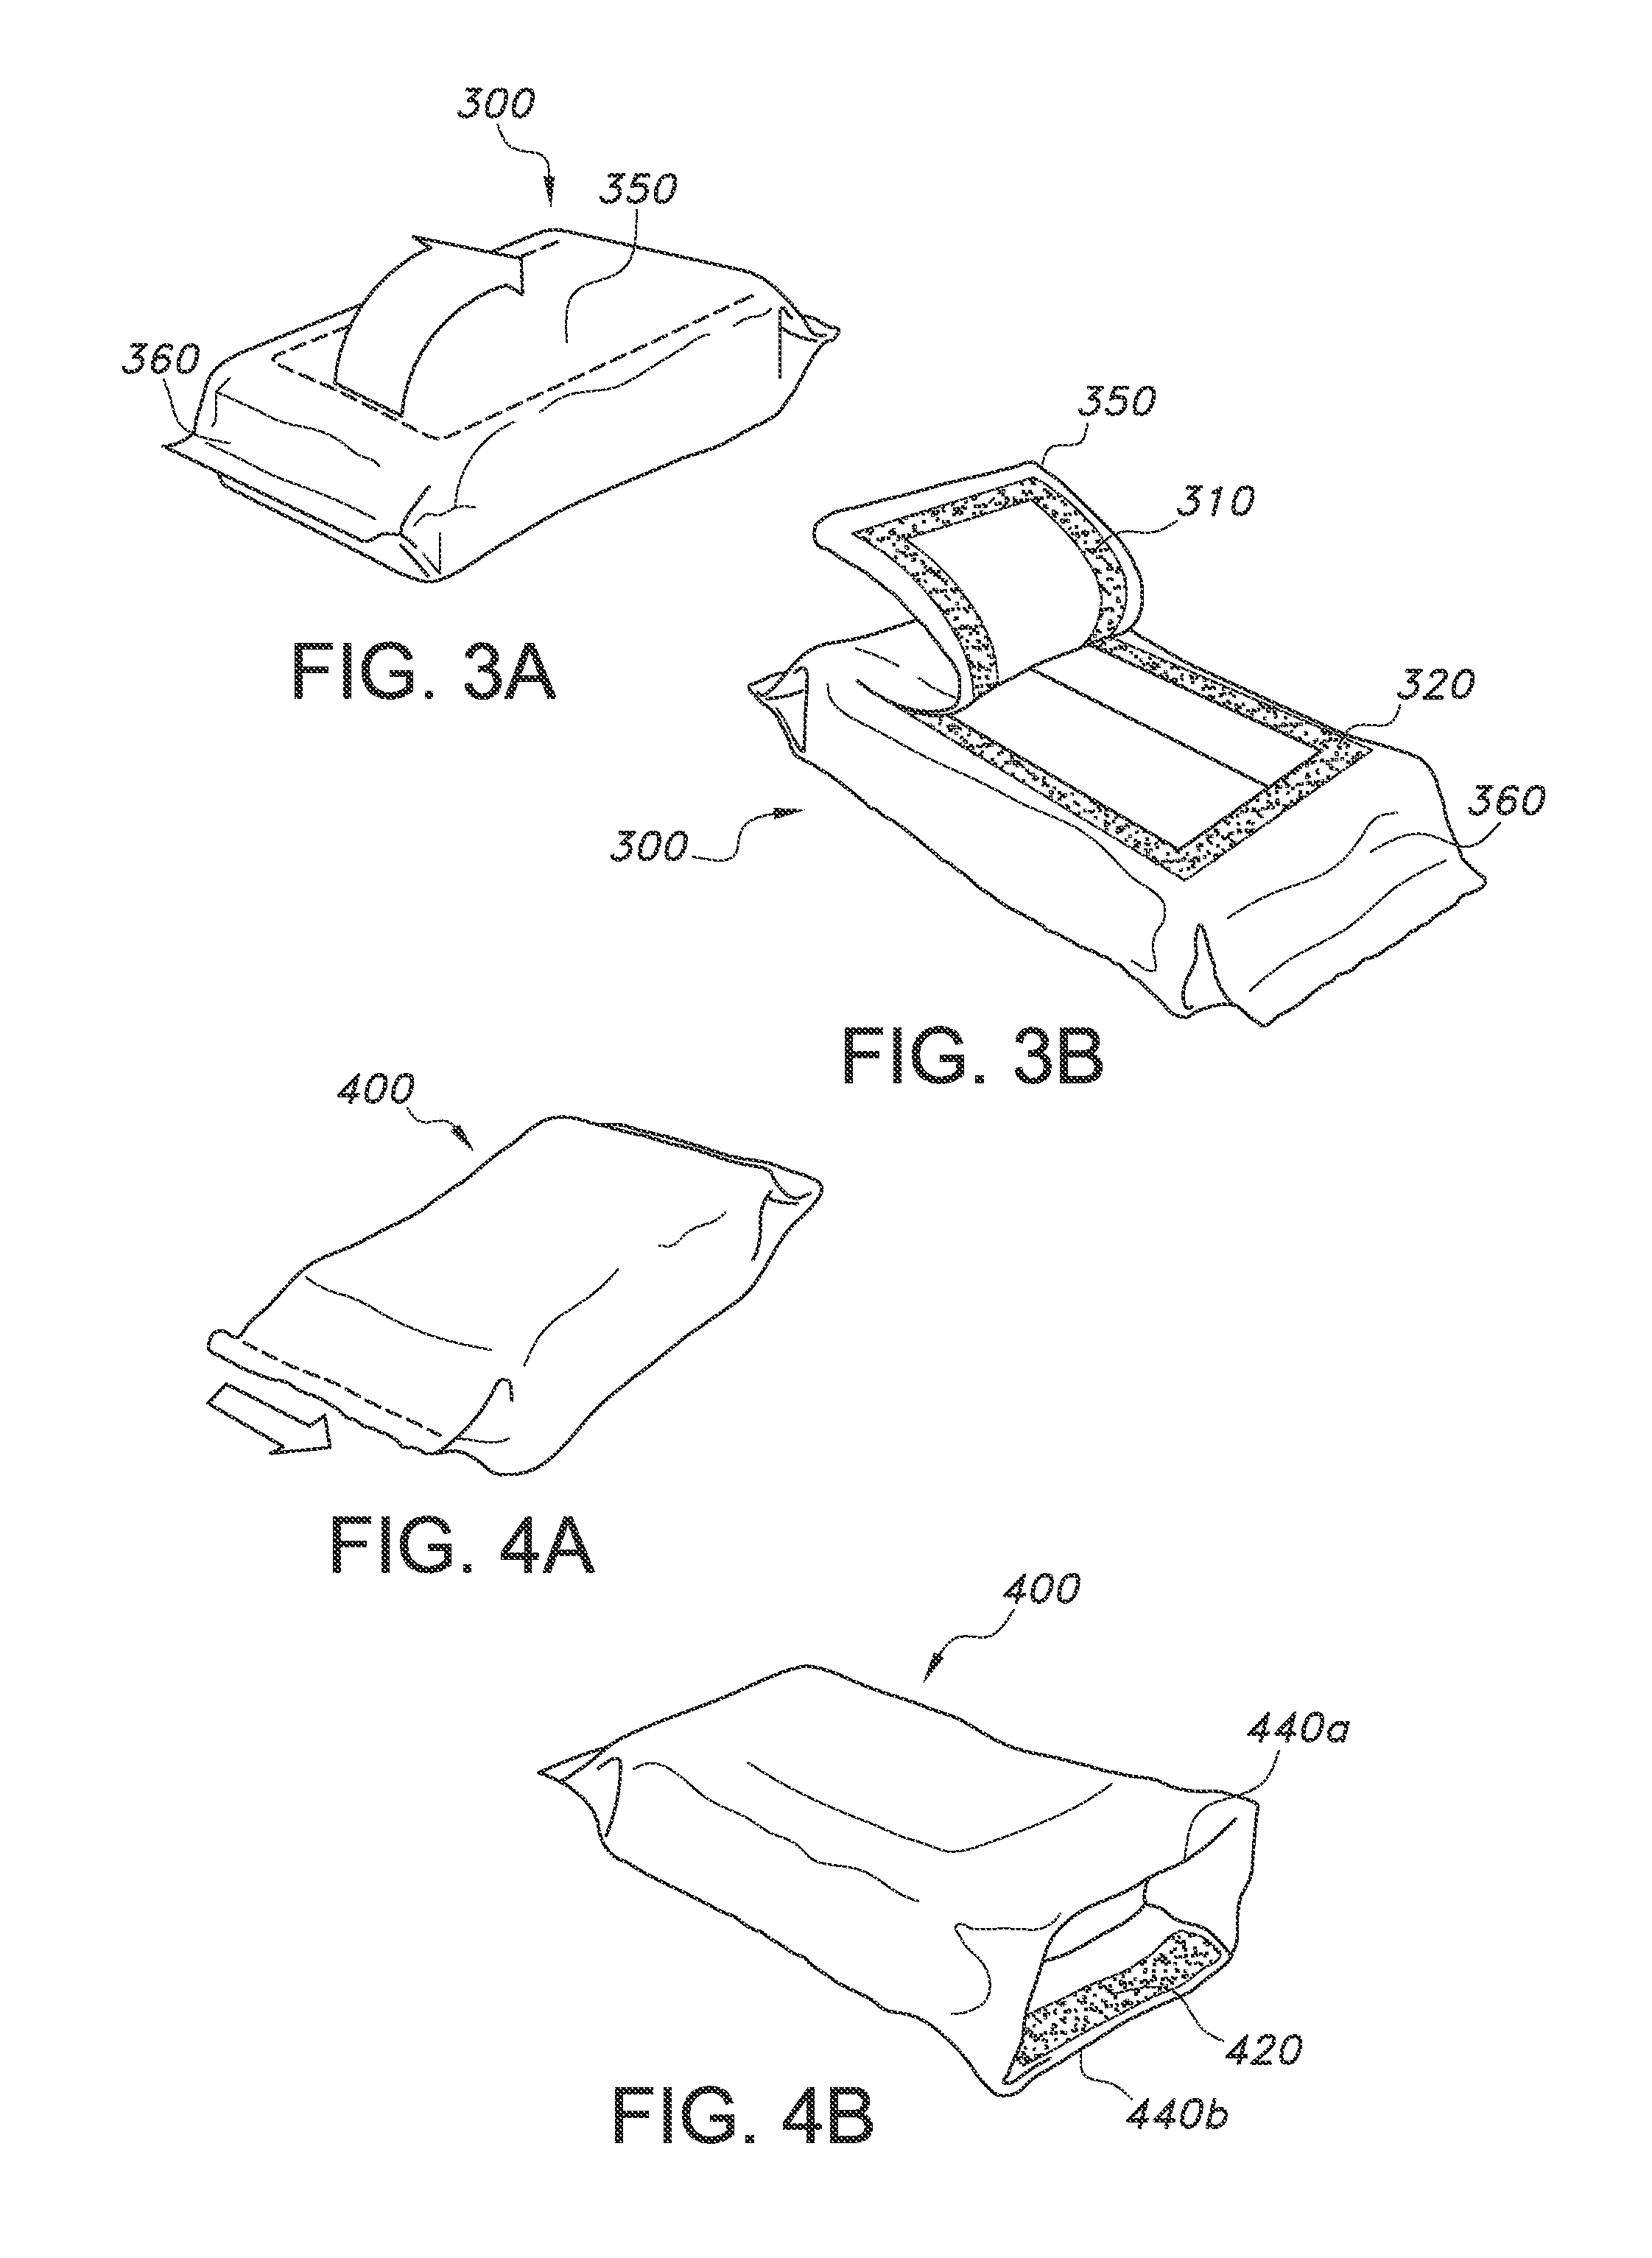 Resealable packaging articles and methods of making and using thereof